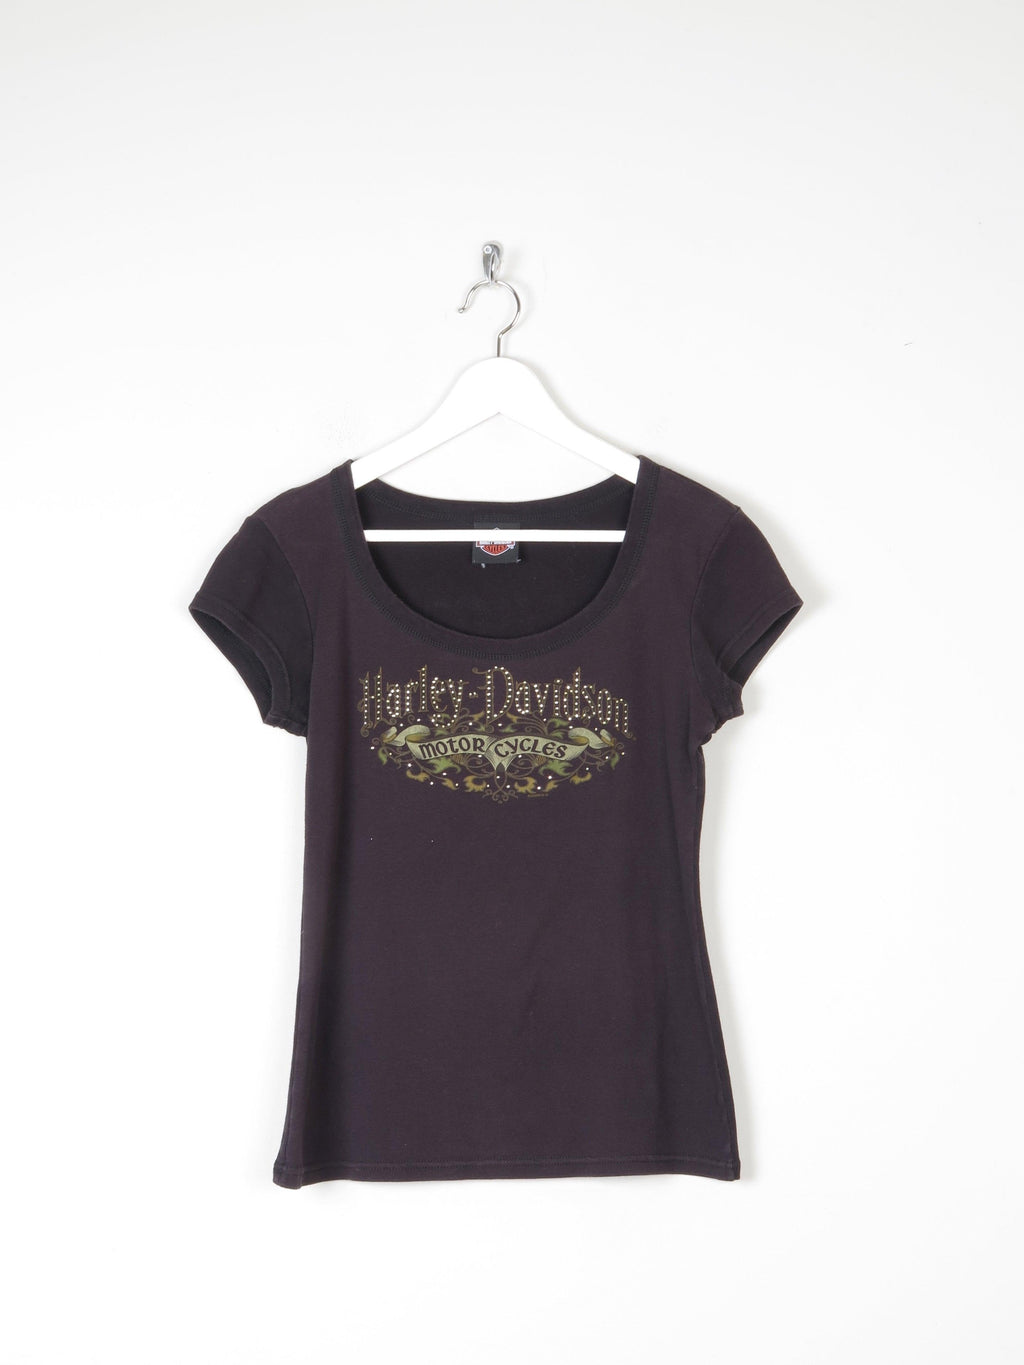 Harley Davidson Fitted Ladies T-shirt S - The Harlequin